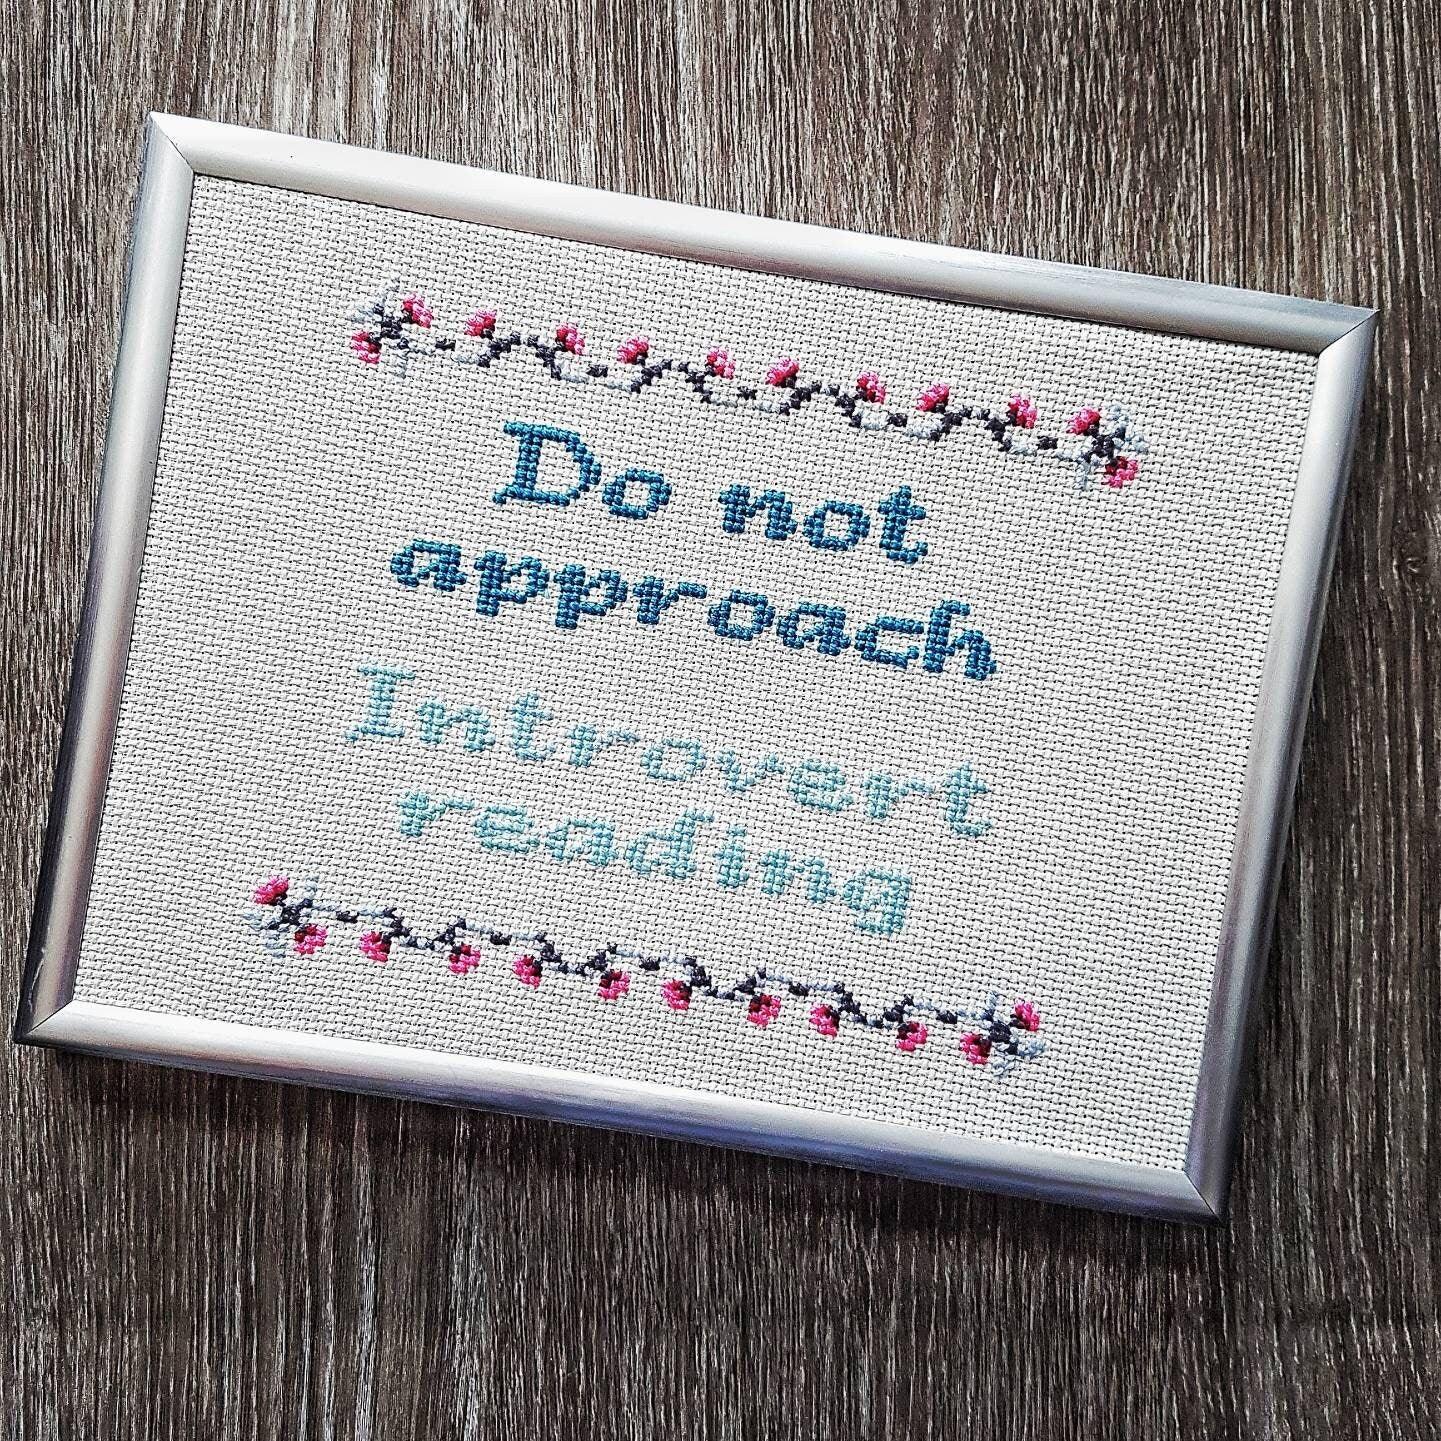 Completed cross stitch quote with the text 'Do not approach, introvert reading' in light and dark blue-green thread. Quote has a grey and pink border of small flowers. Cross stitch has a silver frame   